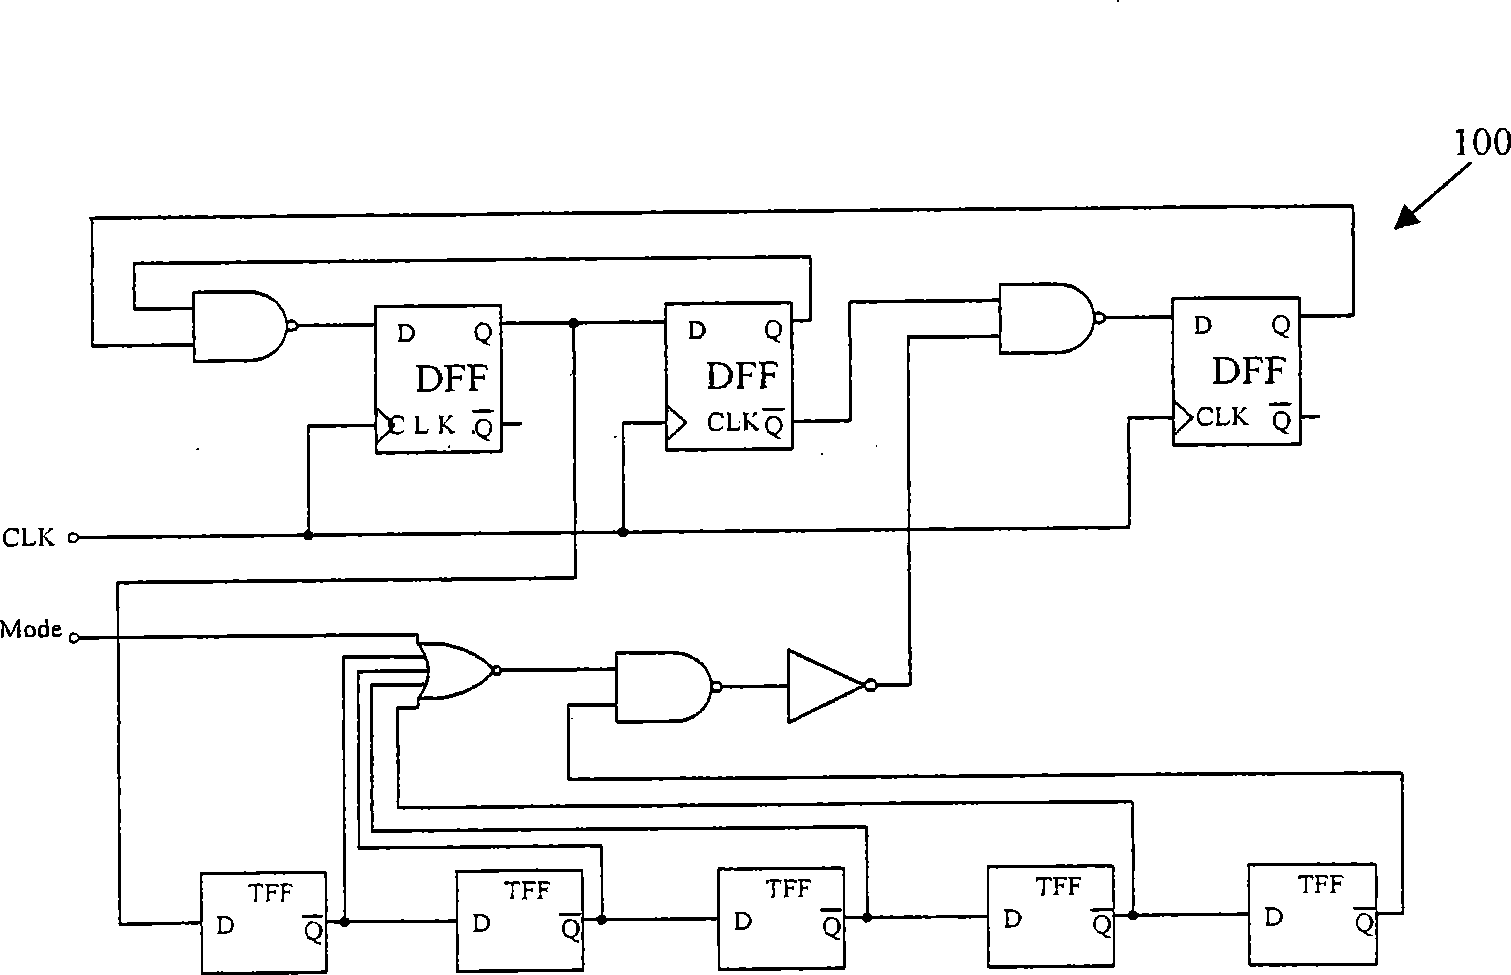 Modularization frequency division unit and frequency divider